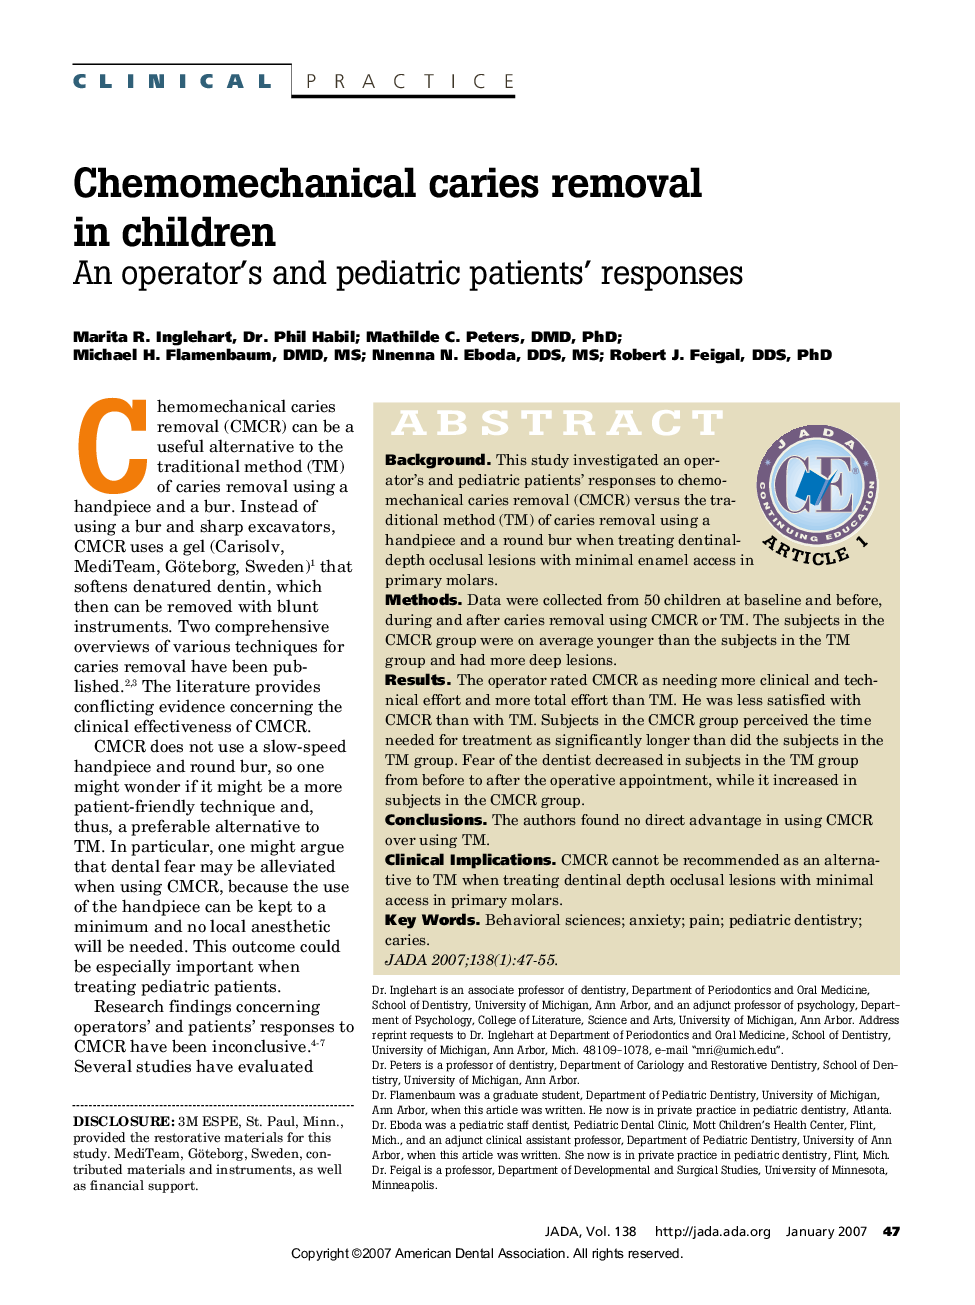 Chemomechanical caries removal in children : An operator's and pediatric patients' responses